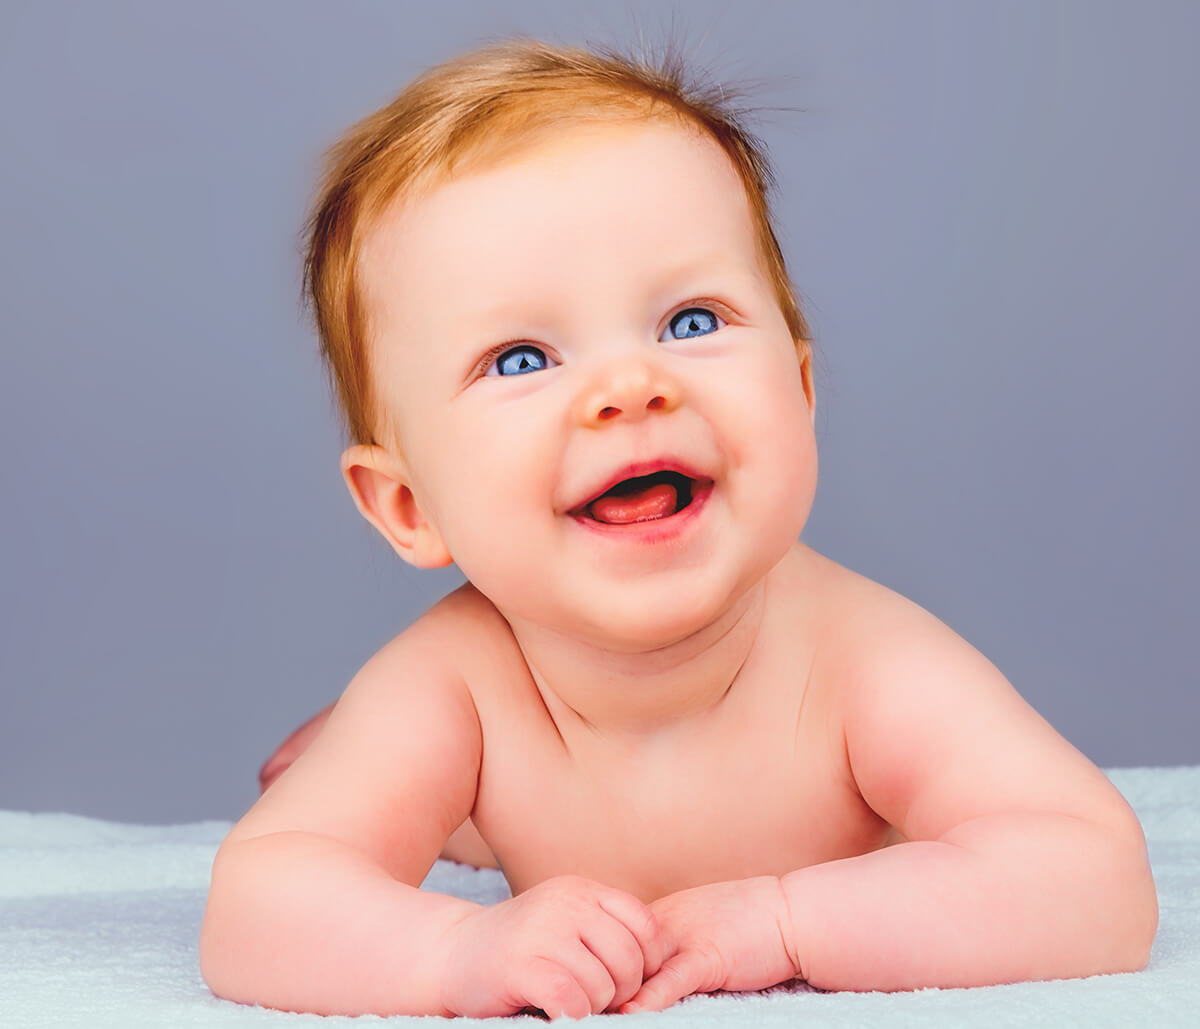 Signs of Tongue Tie in Infants in Hamilton ON Area